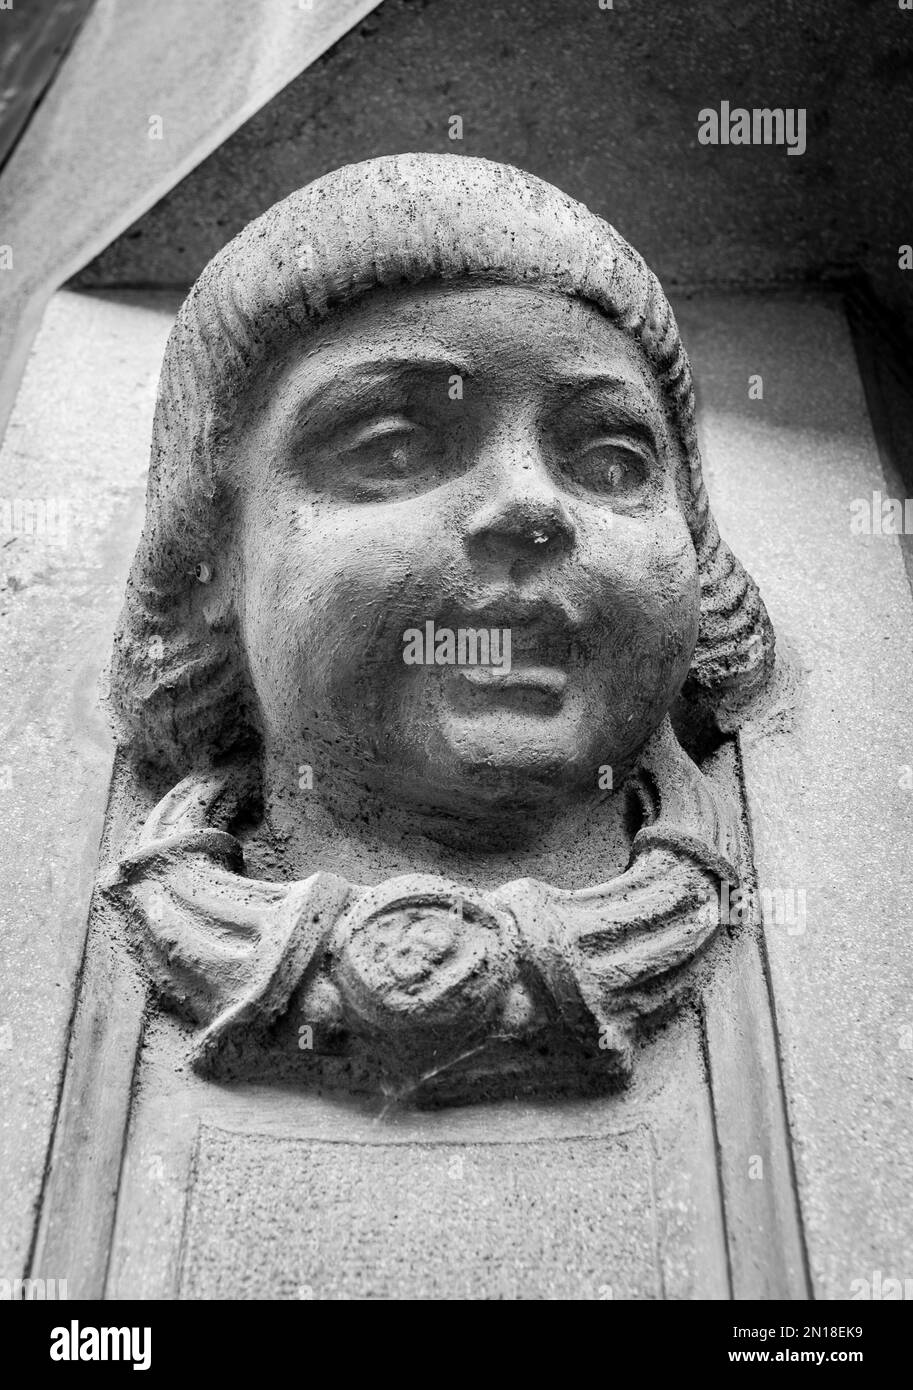 black and white photograph of a statue of a child's head on the entrance wall of an old building in Vienna, Austria Stock Photo